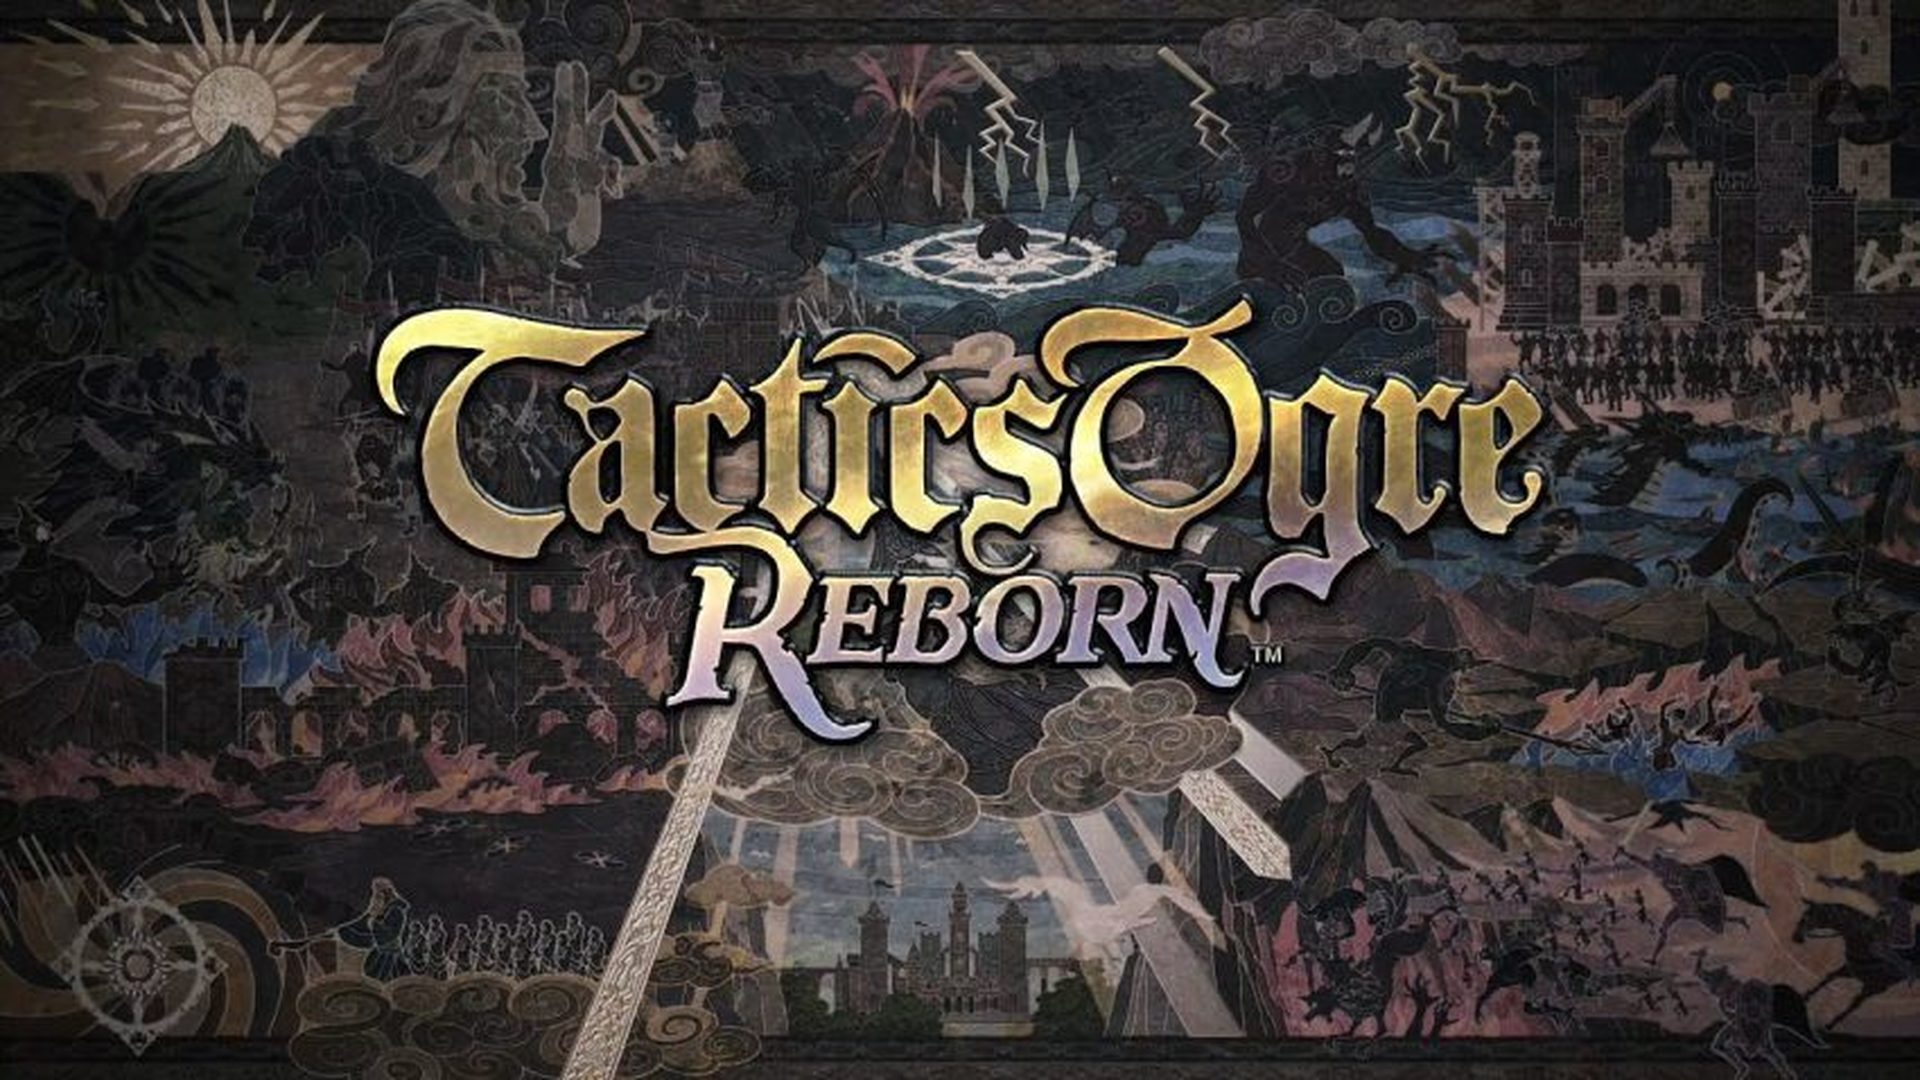 Tactics Ogre Reborn routes (Law, chaos, and neutral) explained